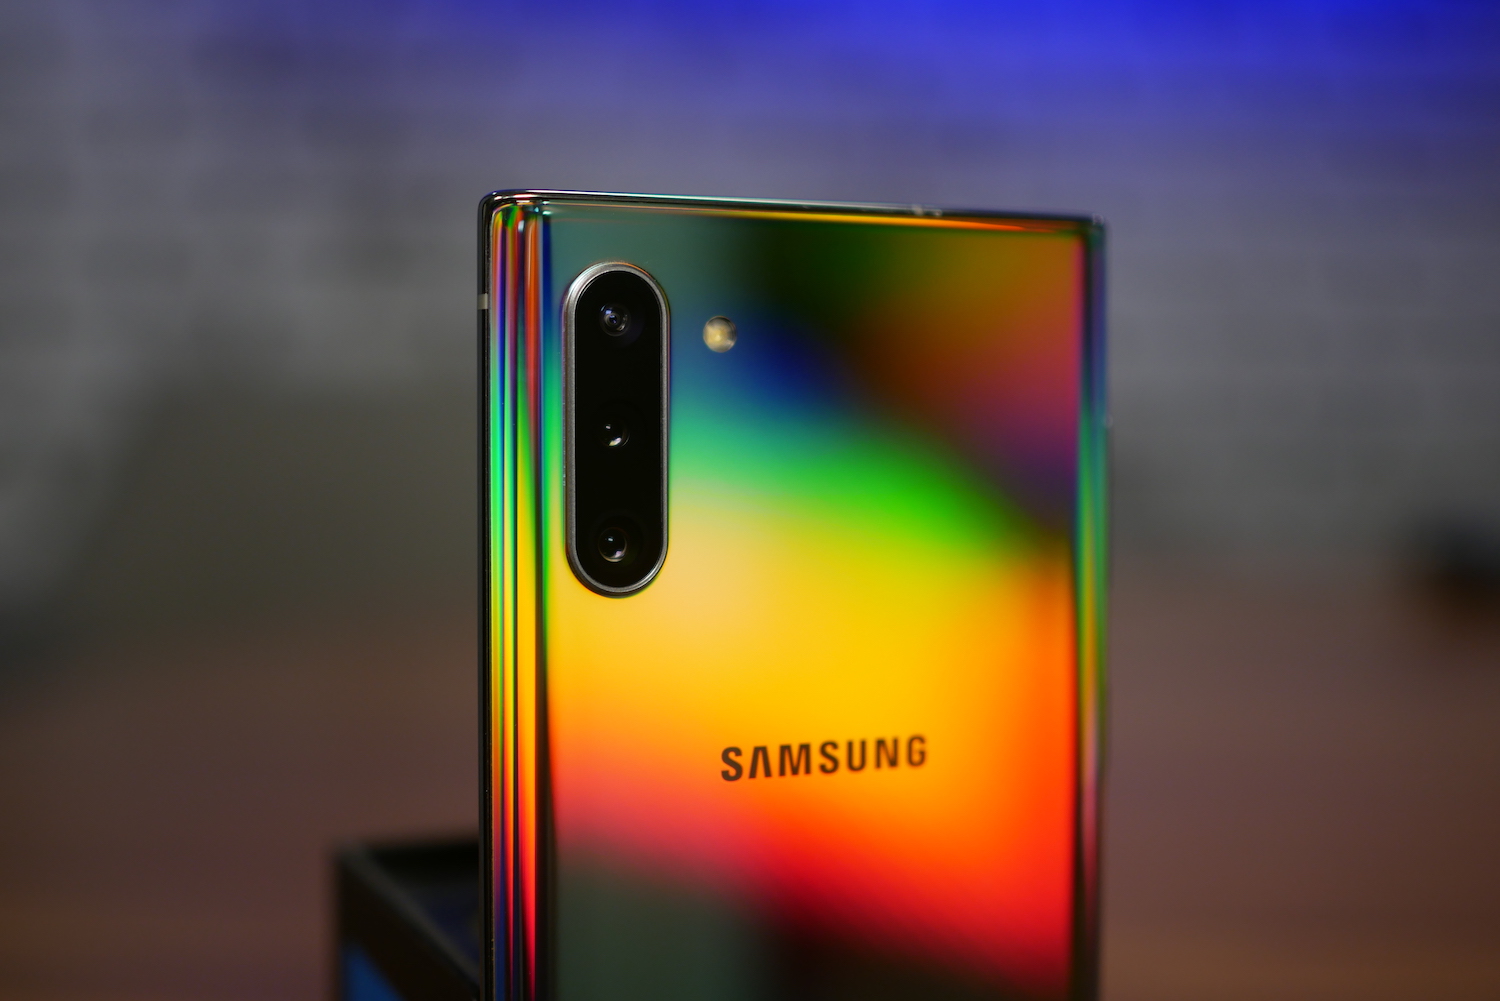 Here are the Camera Samples from the Galaxy Note 10